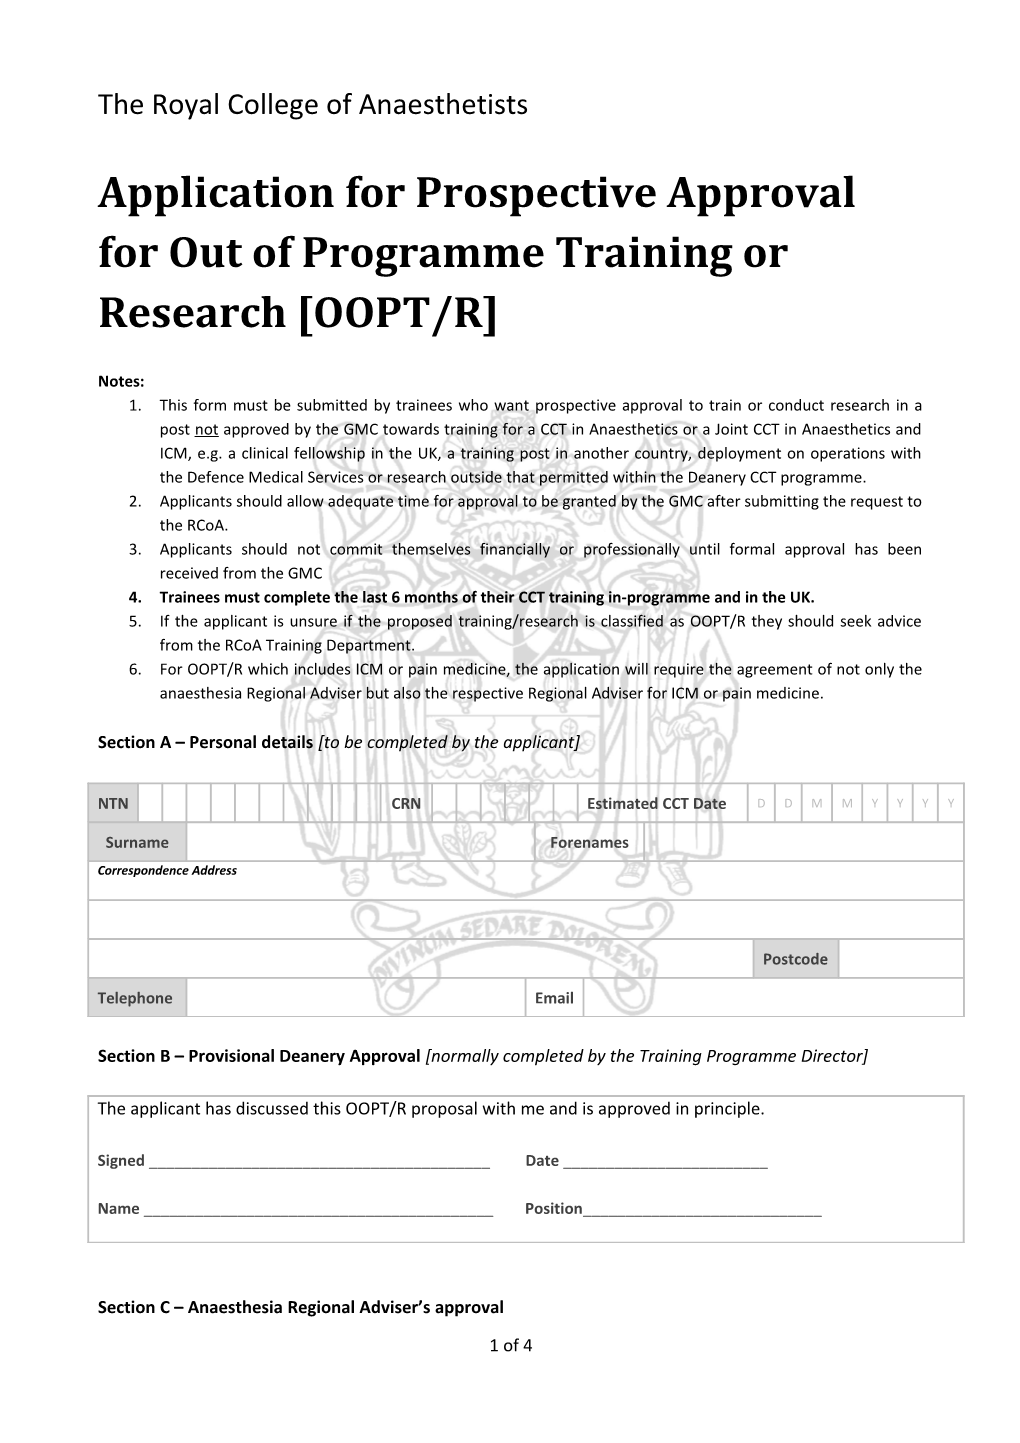 Application for Prospective Approval for out of Programme Training Or Research OOPT/R